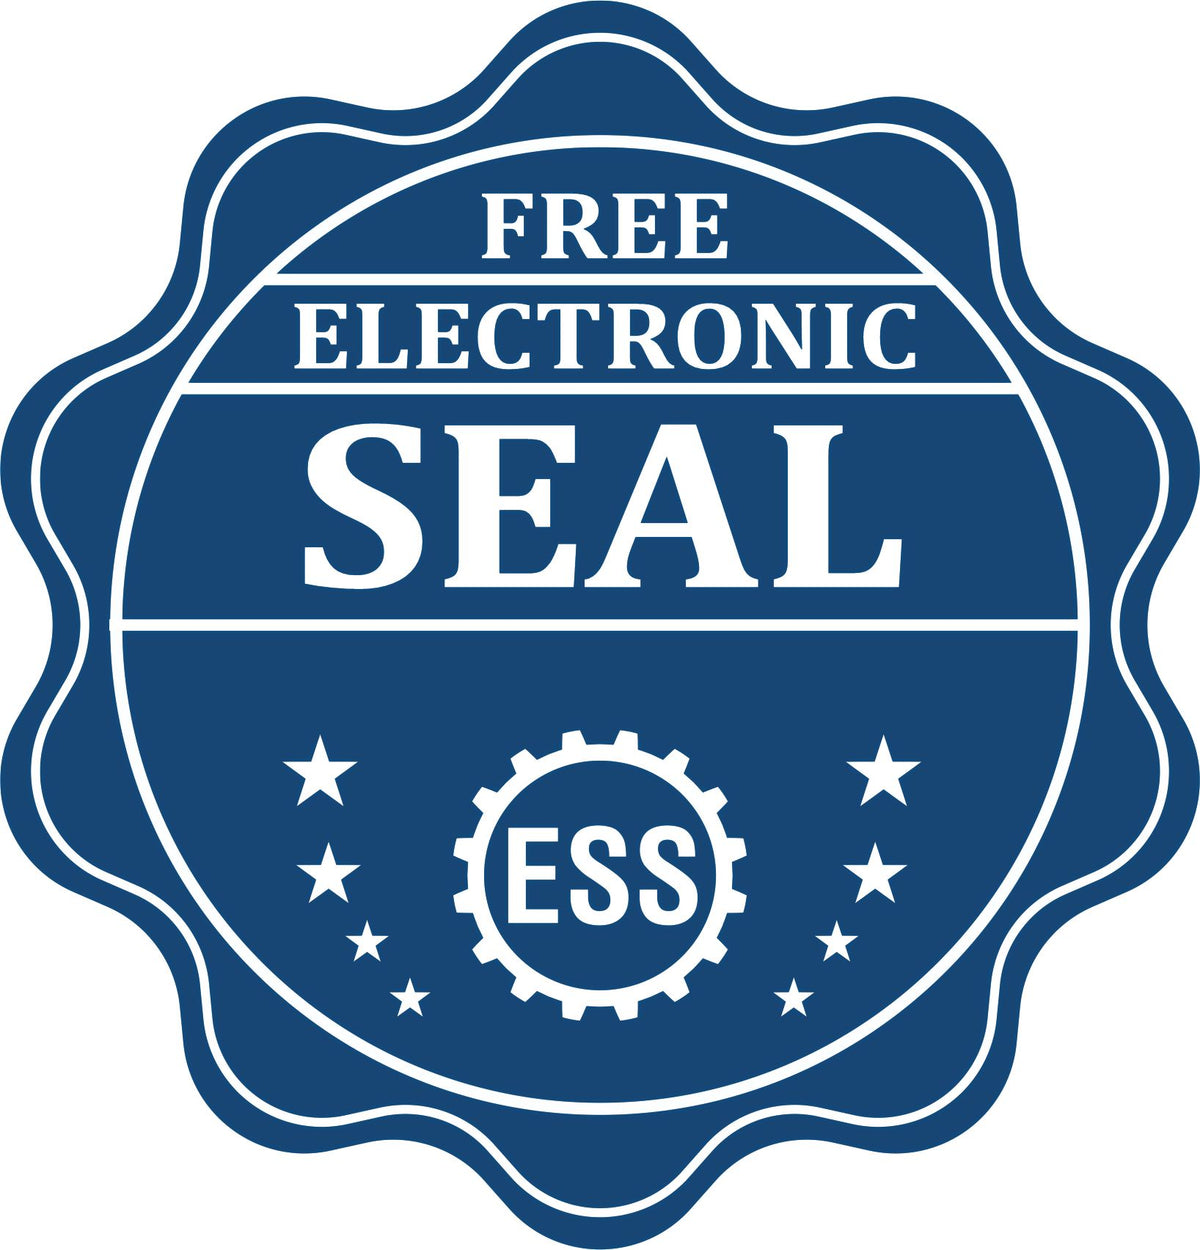 A badge showing a free electronic seal for the Slim Pre-Inked Idaho Professional Geologist Seal Stamp with stars and the ESS gear on the emblem.